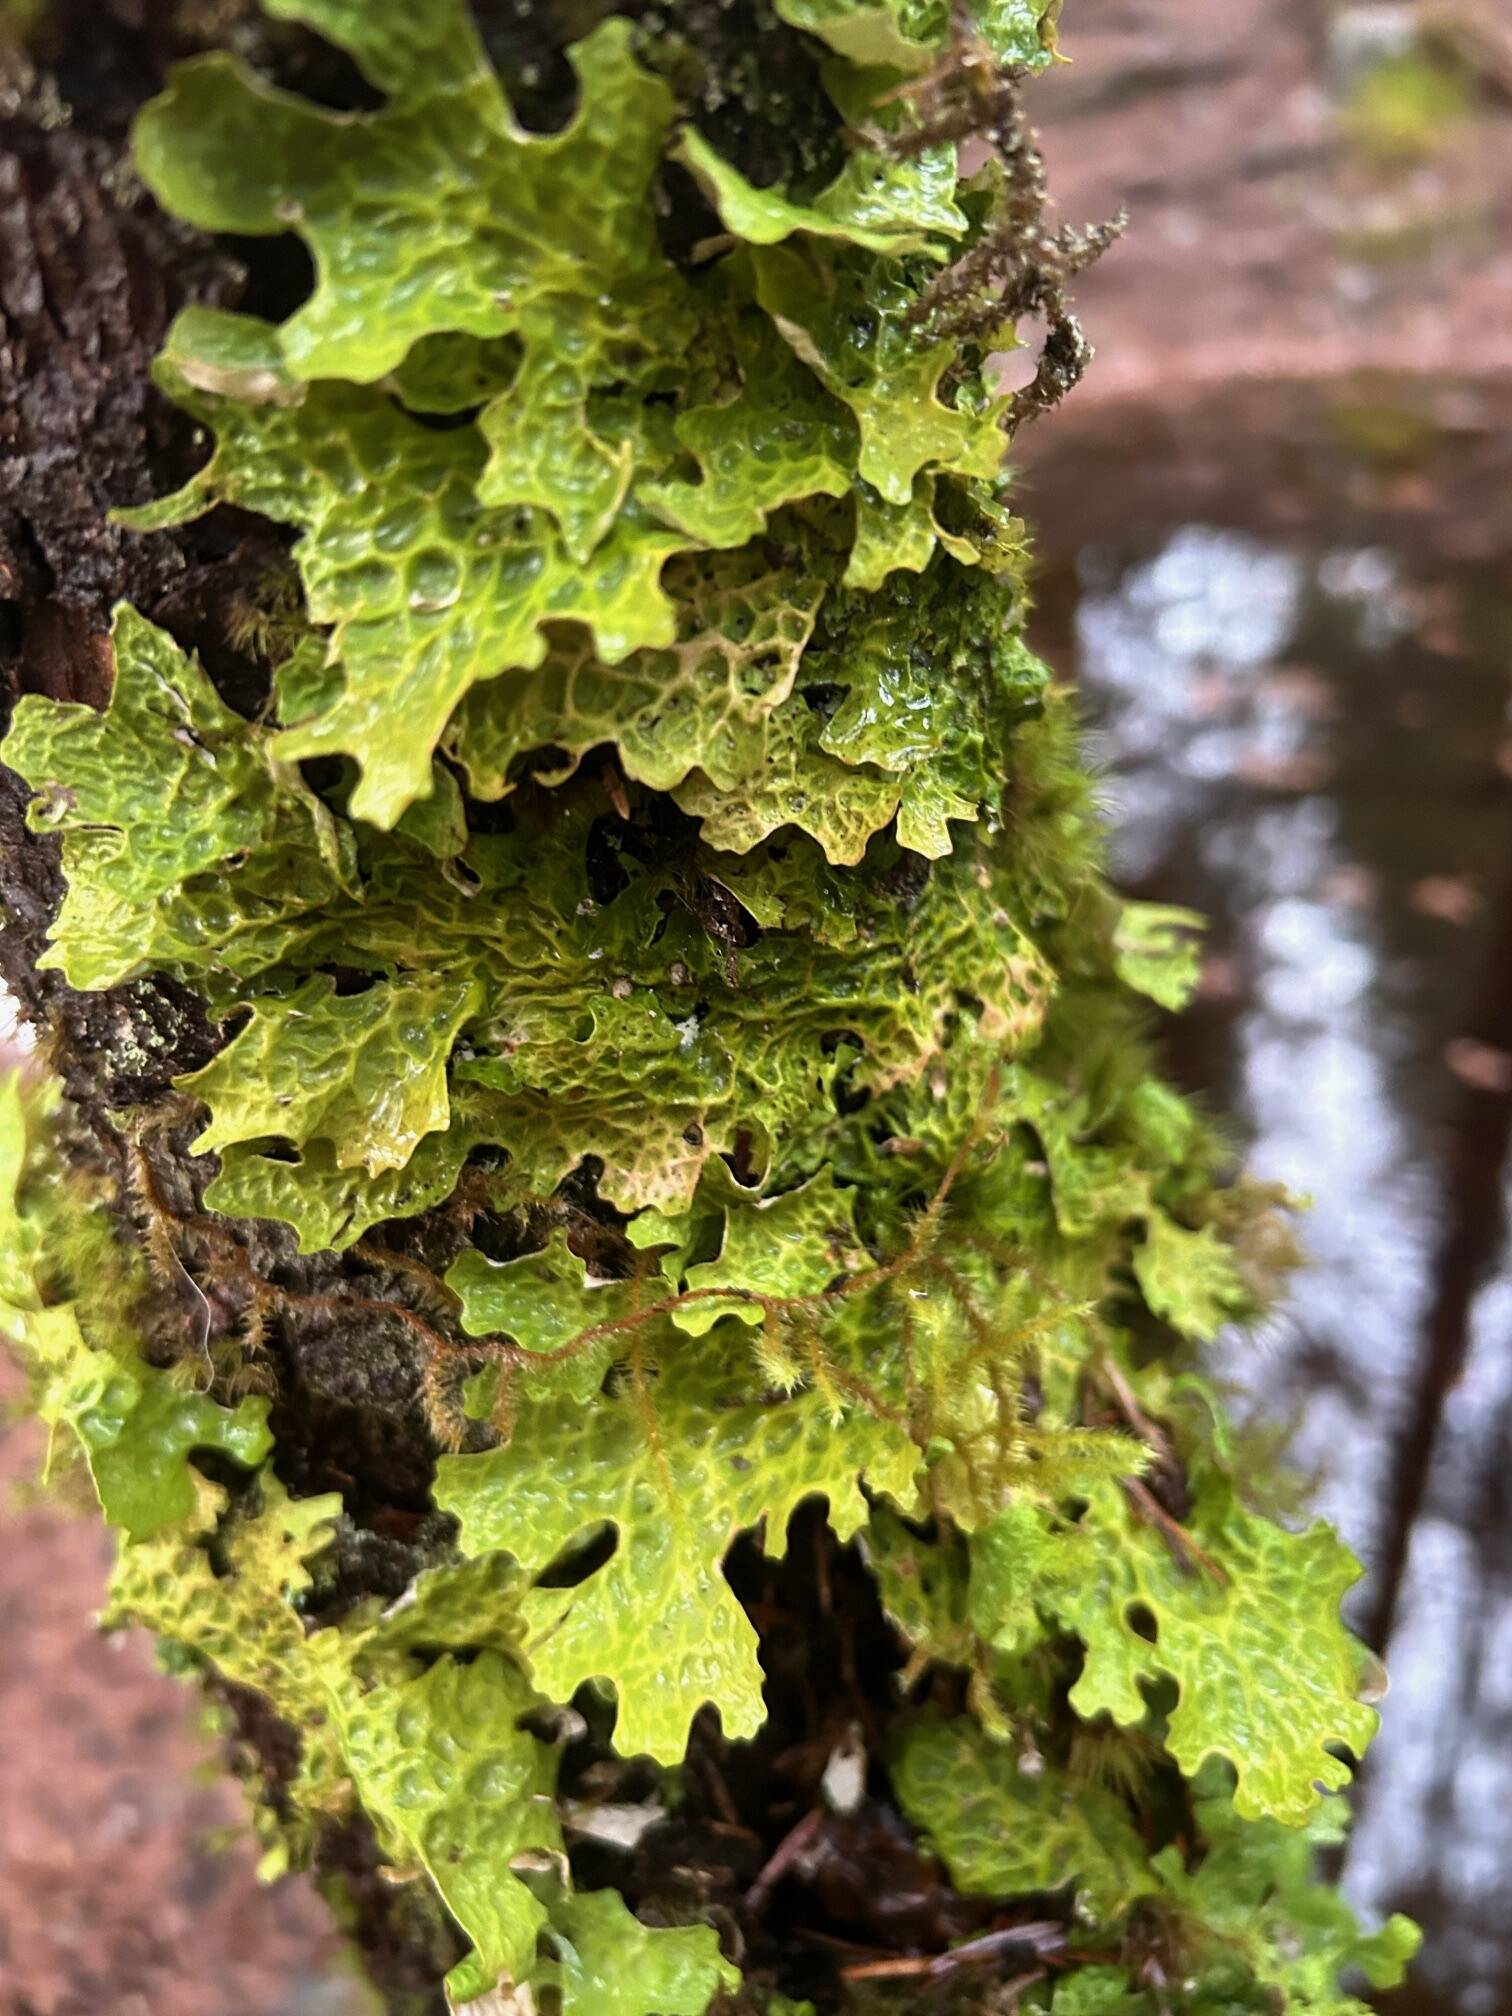 Cabbage lung lichen in the Dredge Lakes area, submitted on Dec. 6. (Photo by Deborah Rudis)